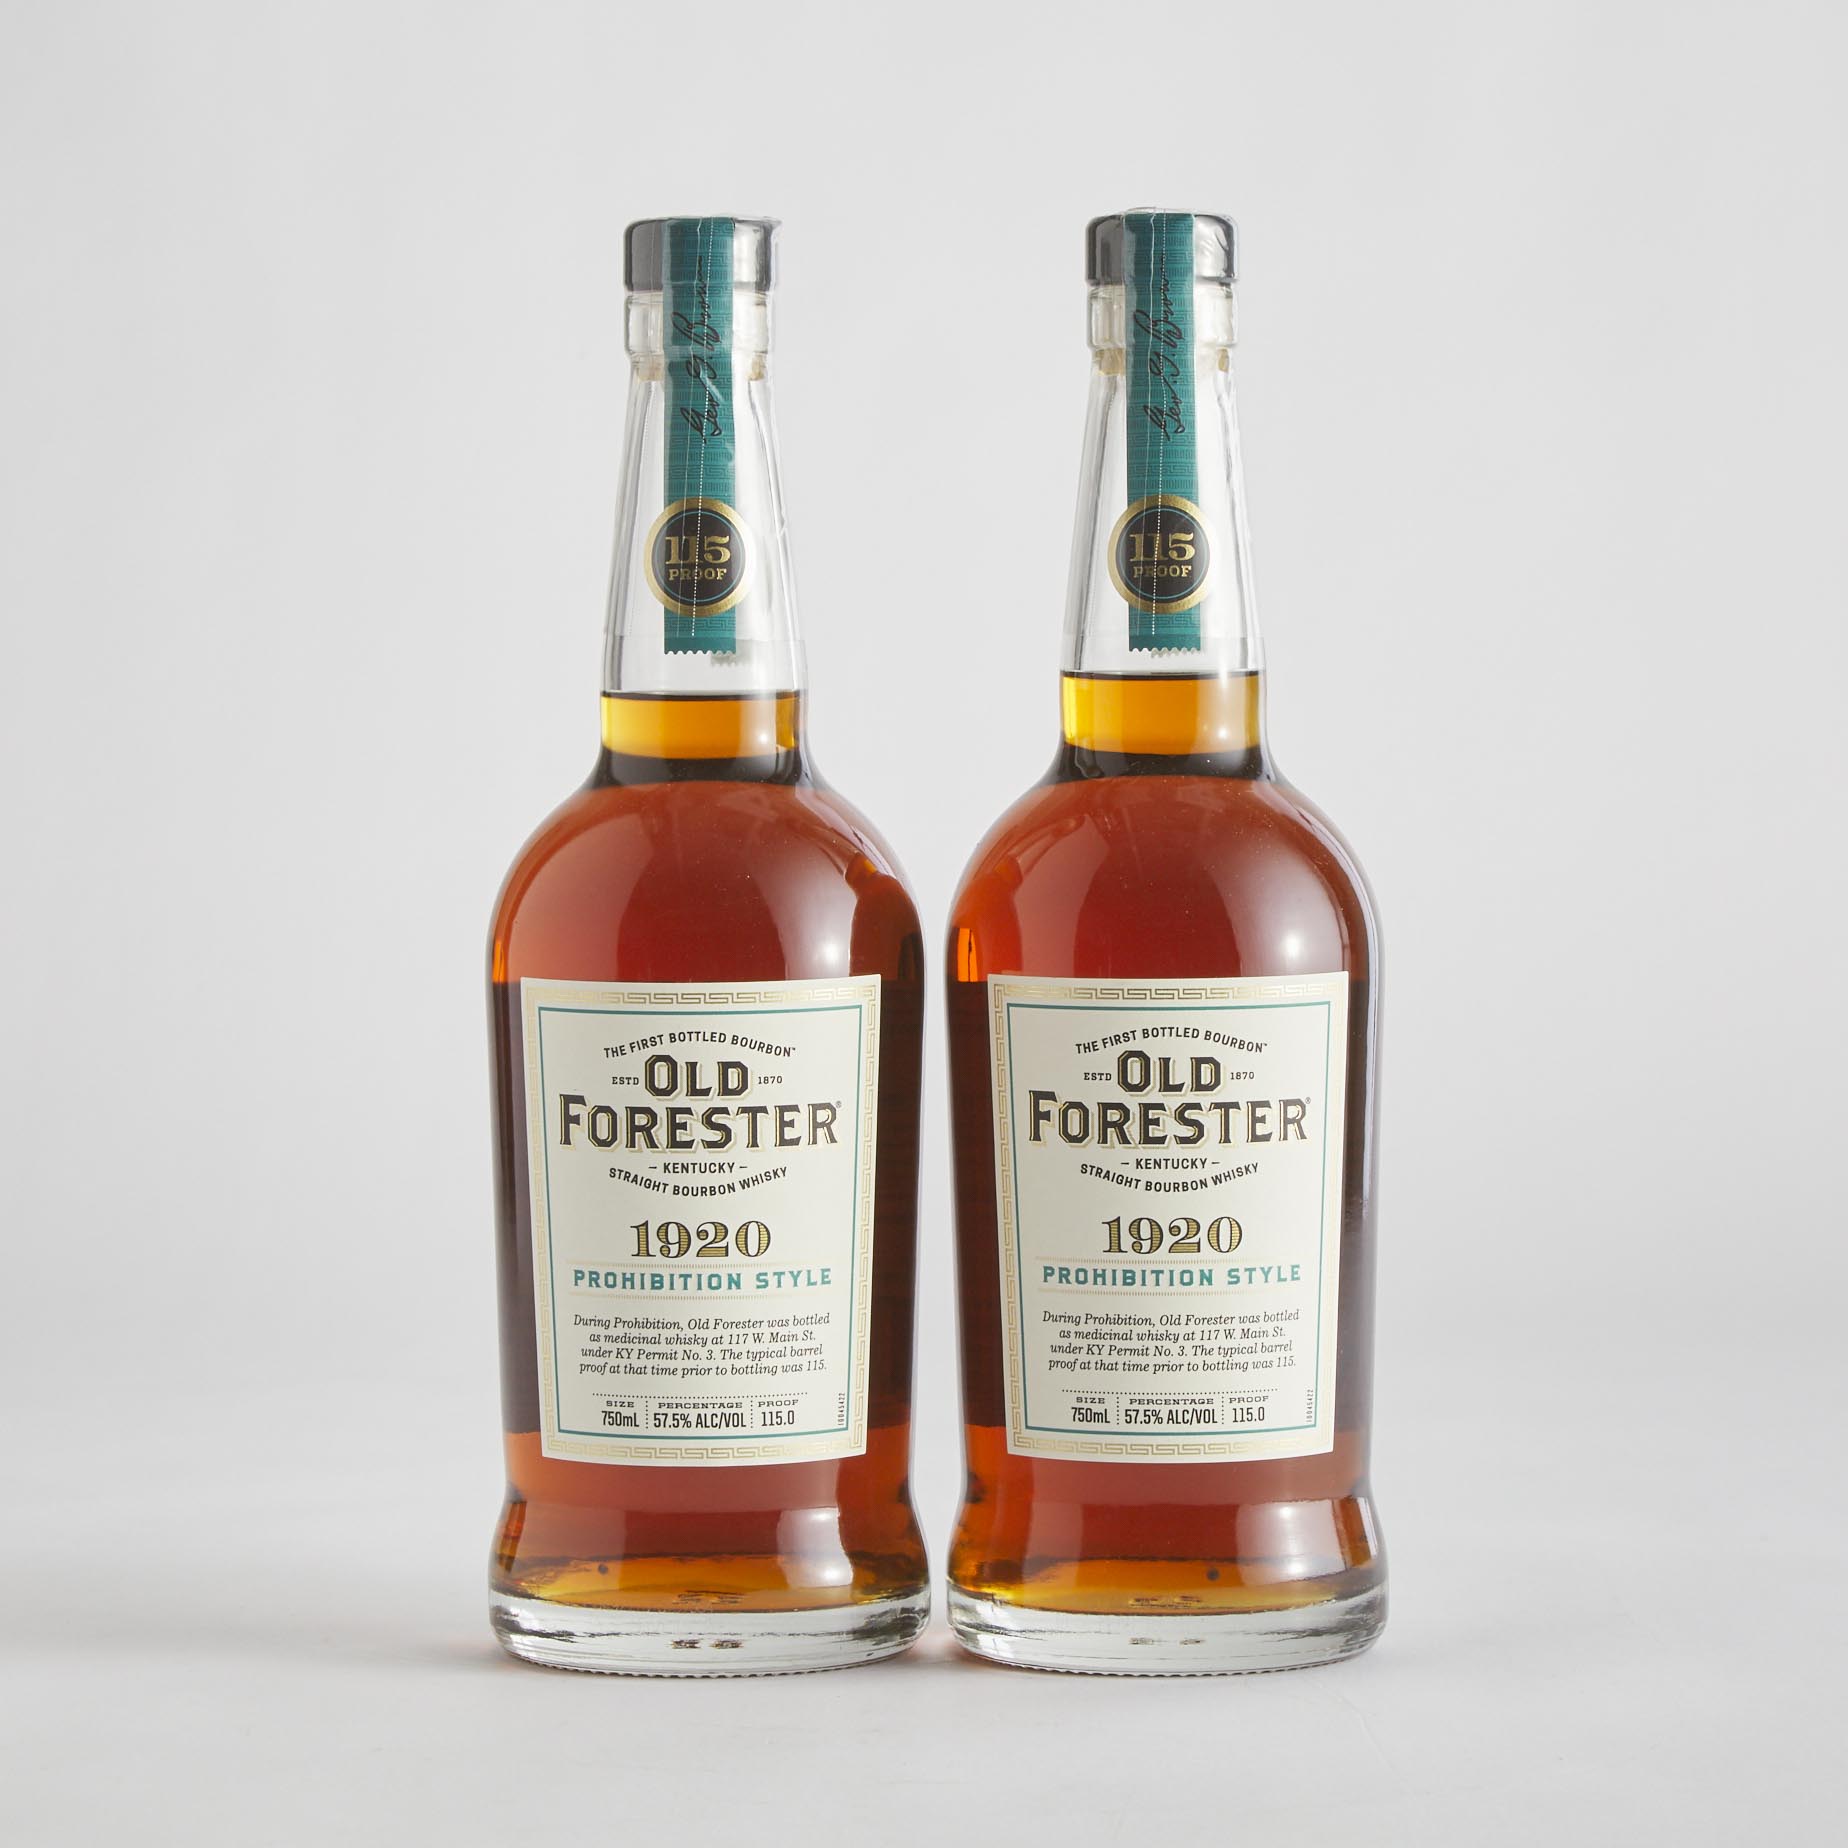 OLD FORESTER KENTUCKY STRAIGHT BOURBON WHISKY NAS (TWO 750 ML)